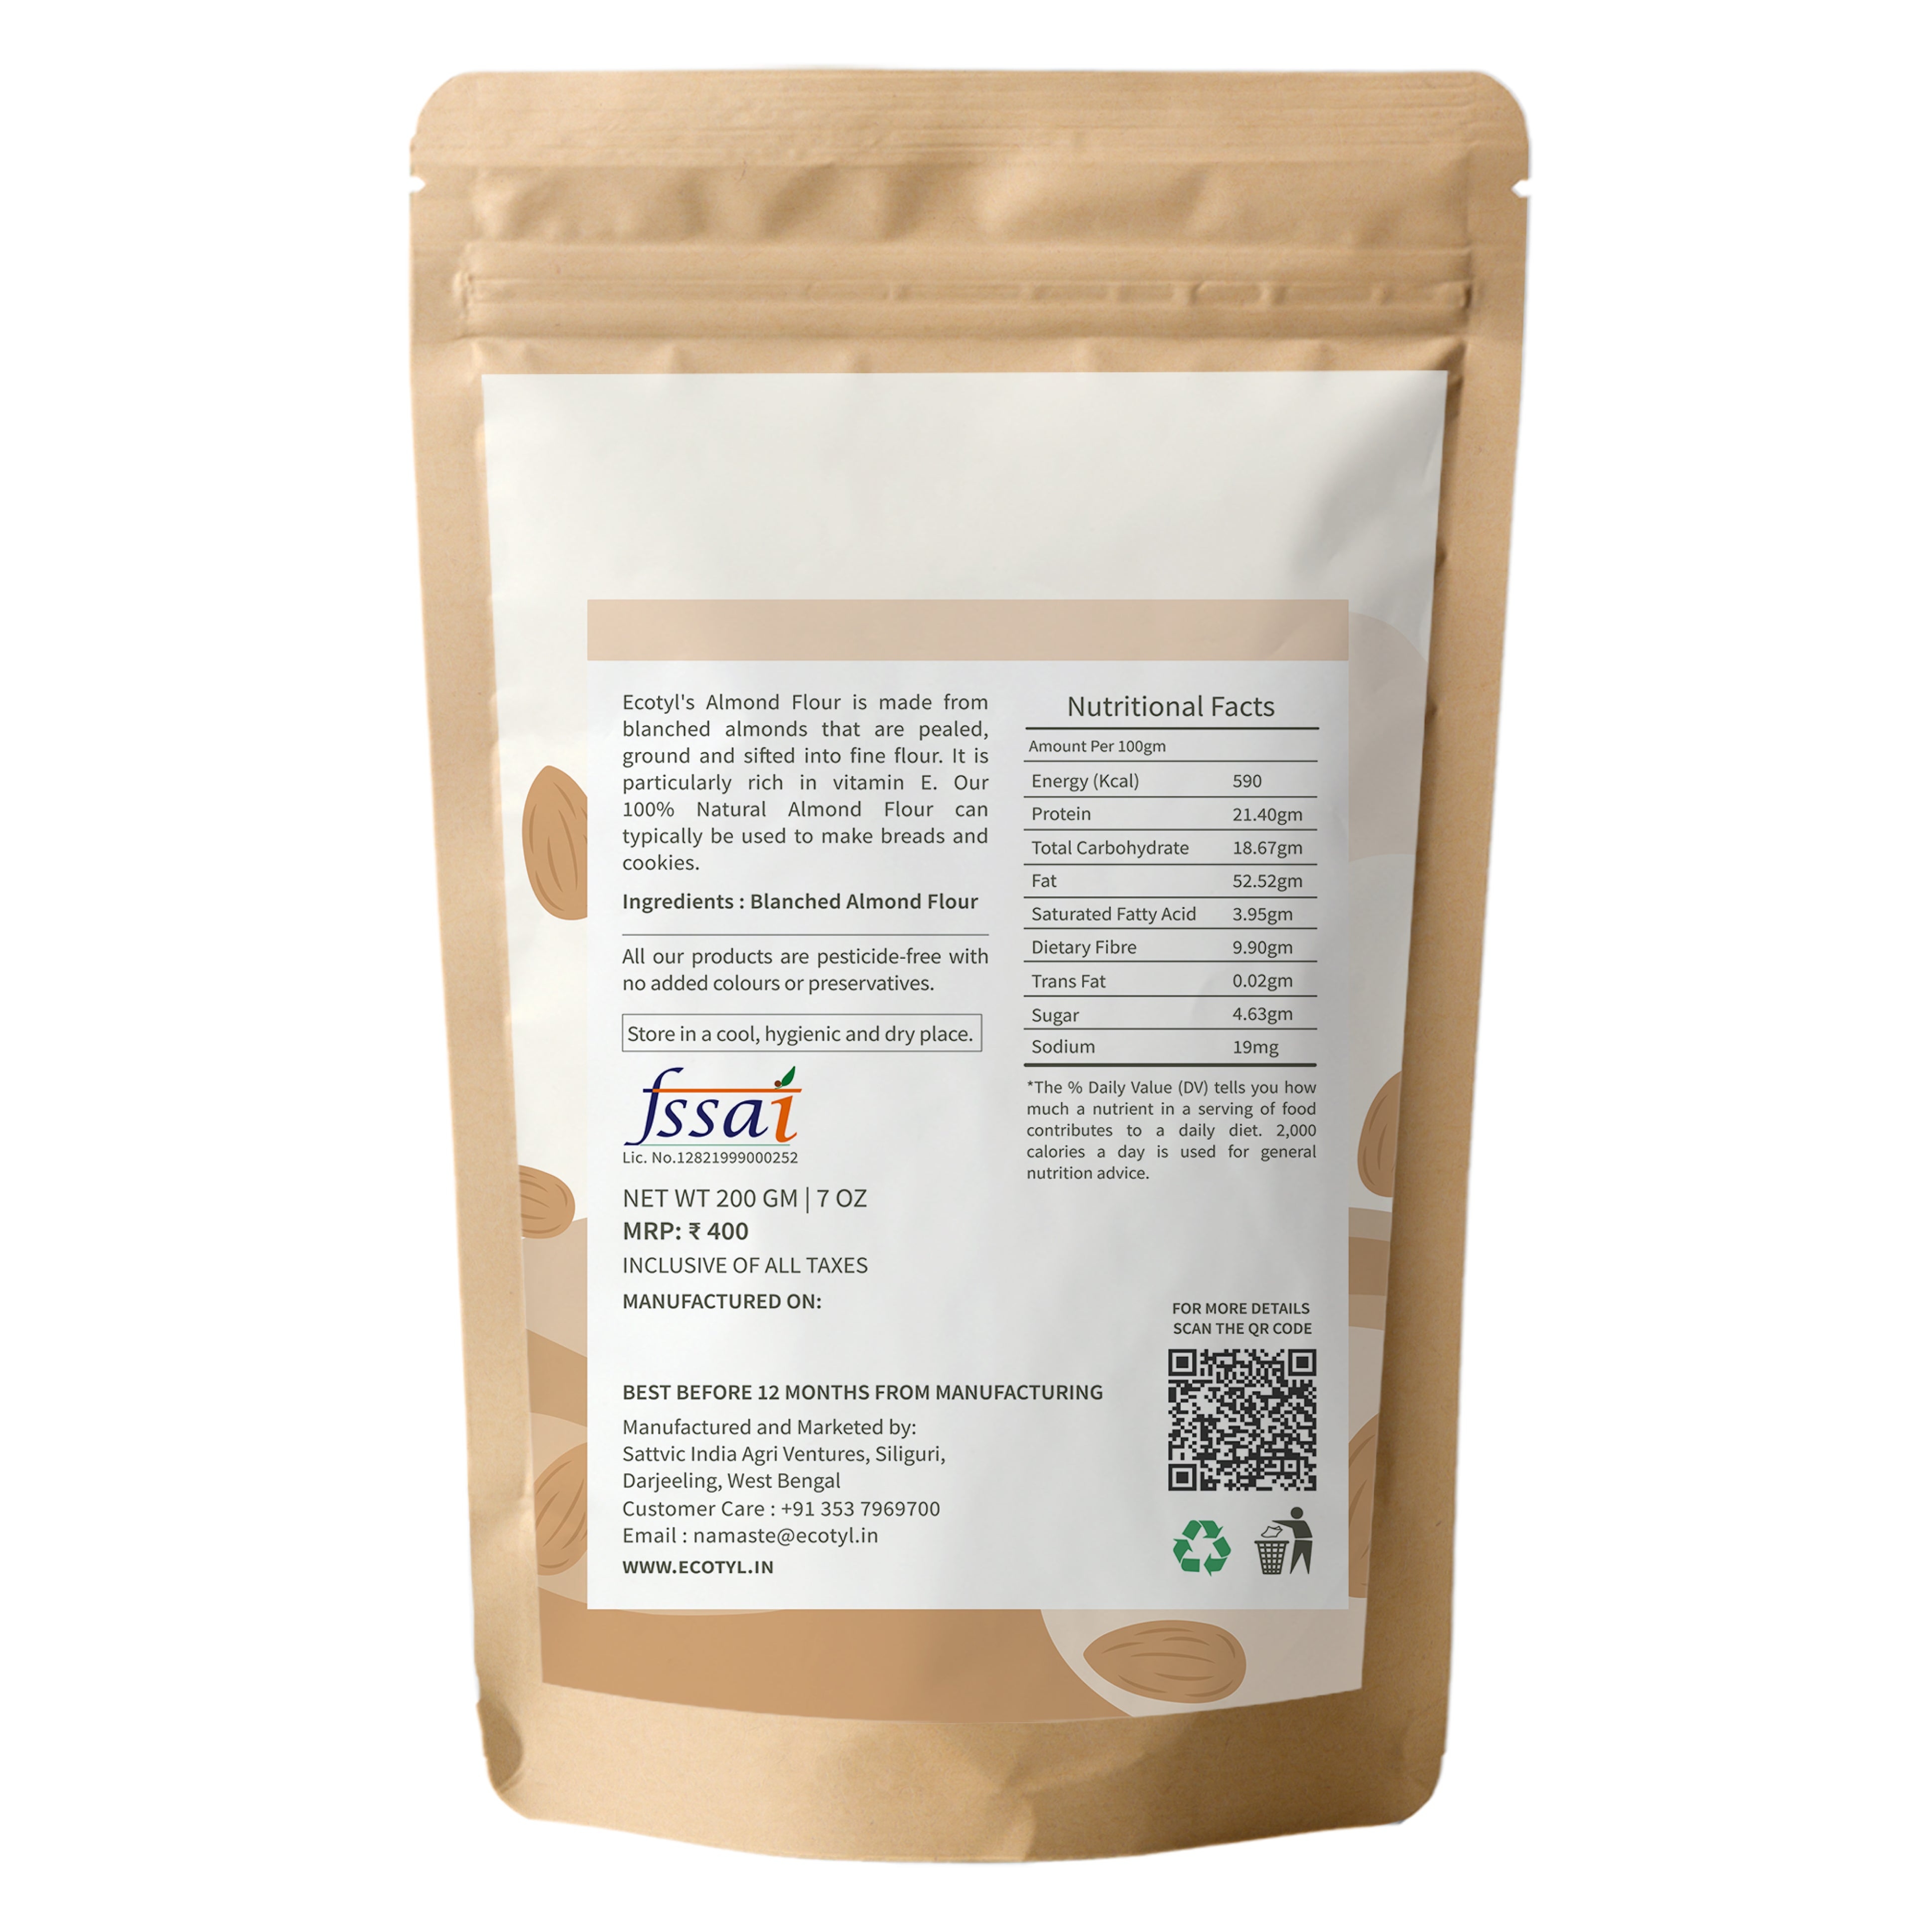 Ecotyl Natural Almond Flour (Blanched) 